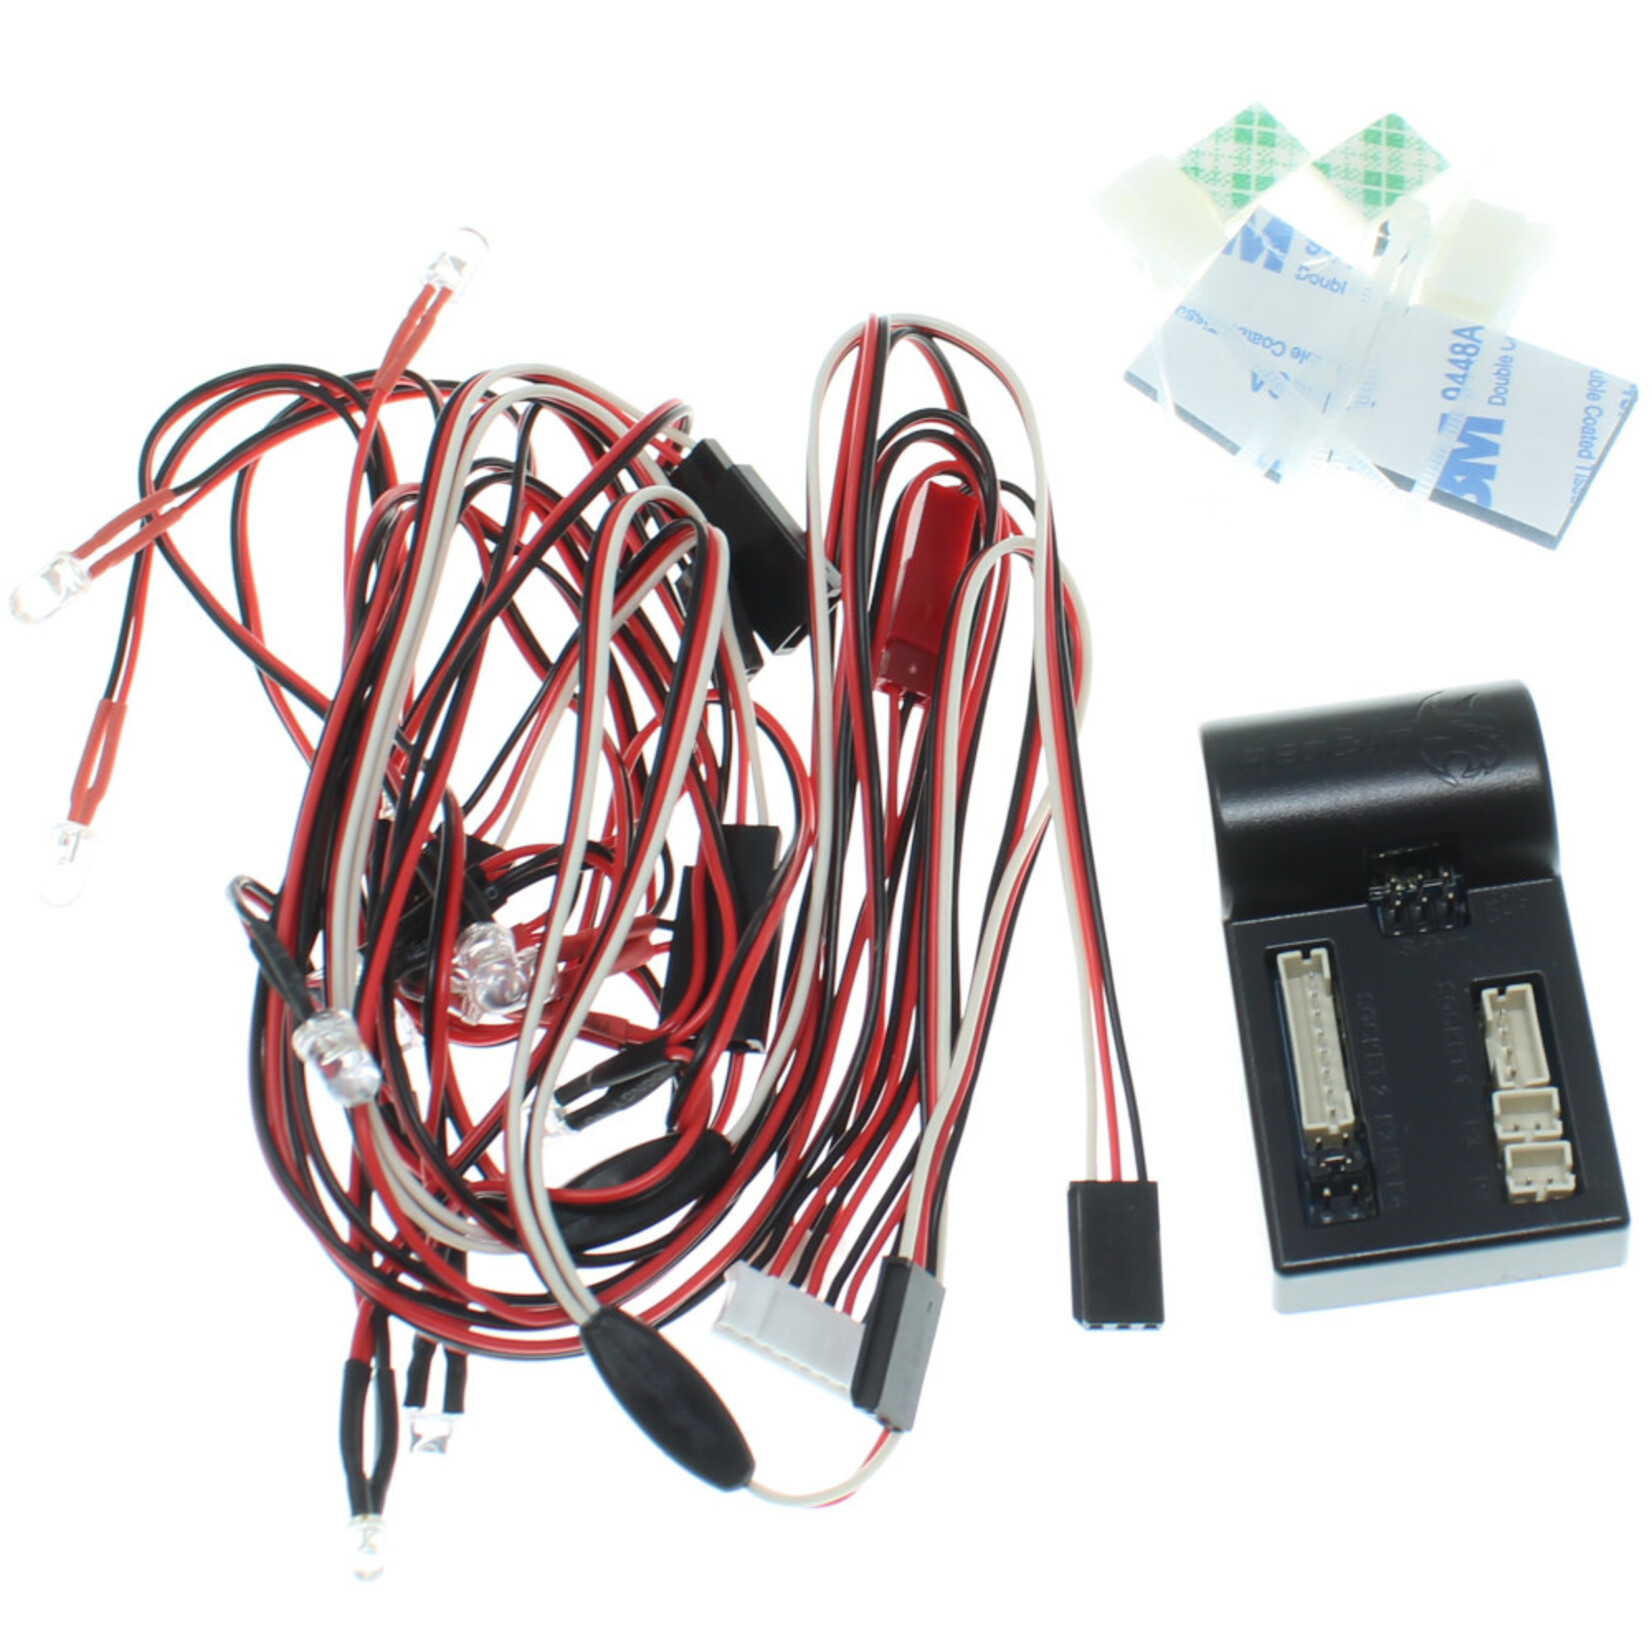 Redcat Racing 14 LED Light Kit with Control Box (1pc)